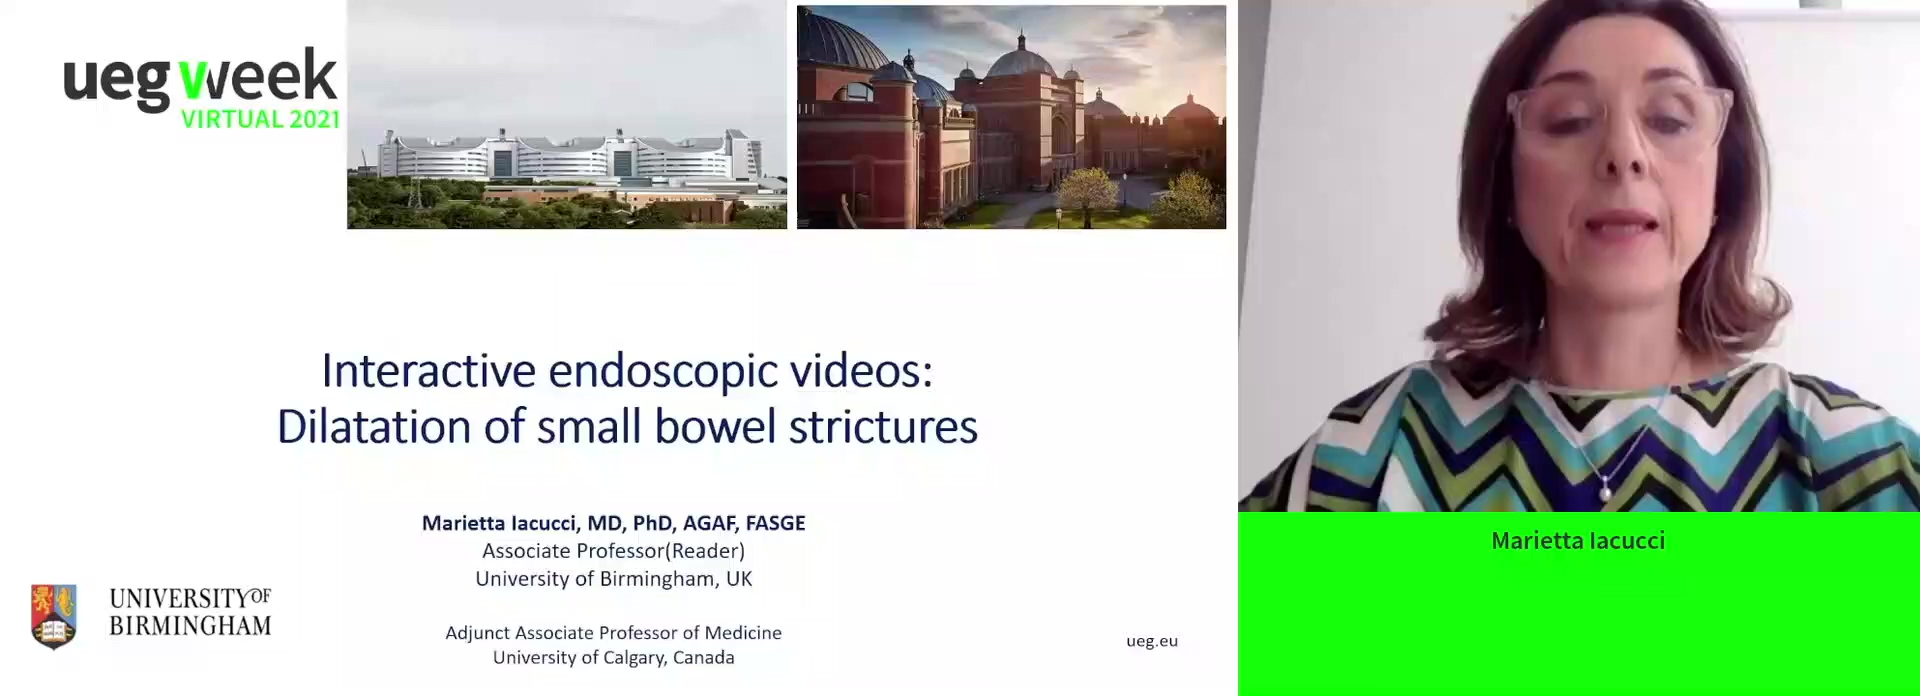 Interactive endoscopic videos: Dilatation of small bowel strictures